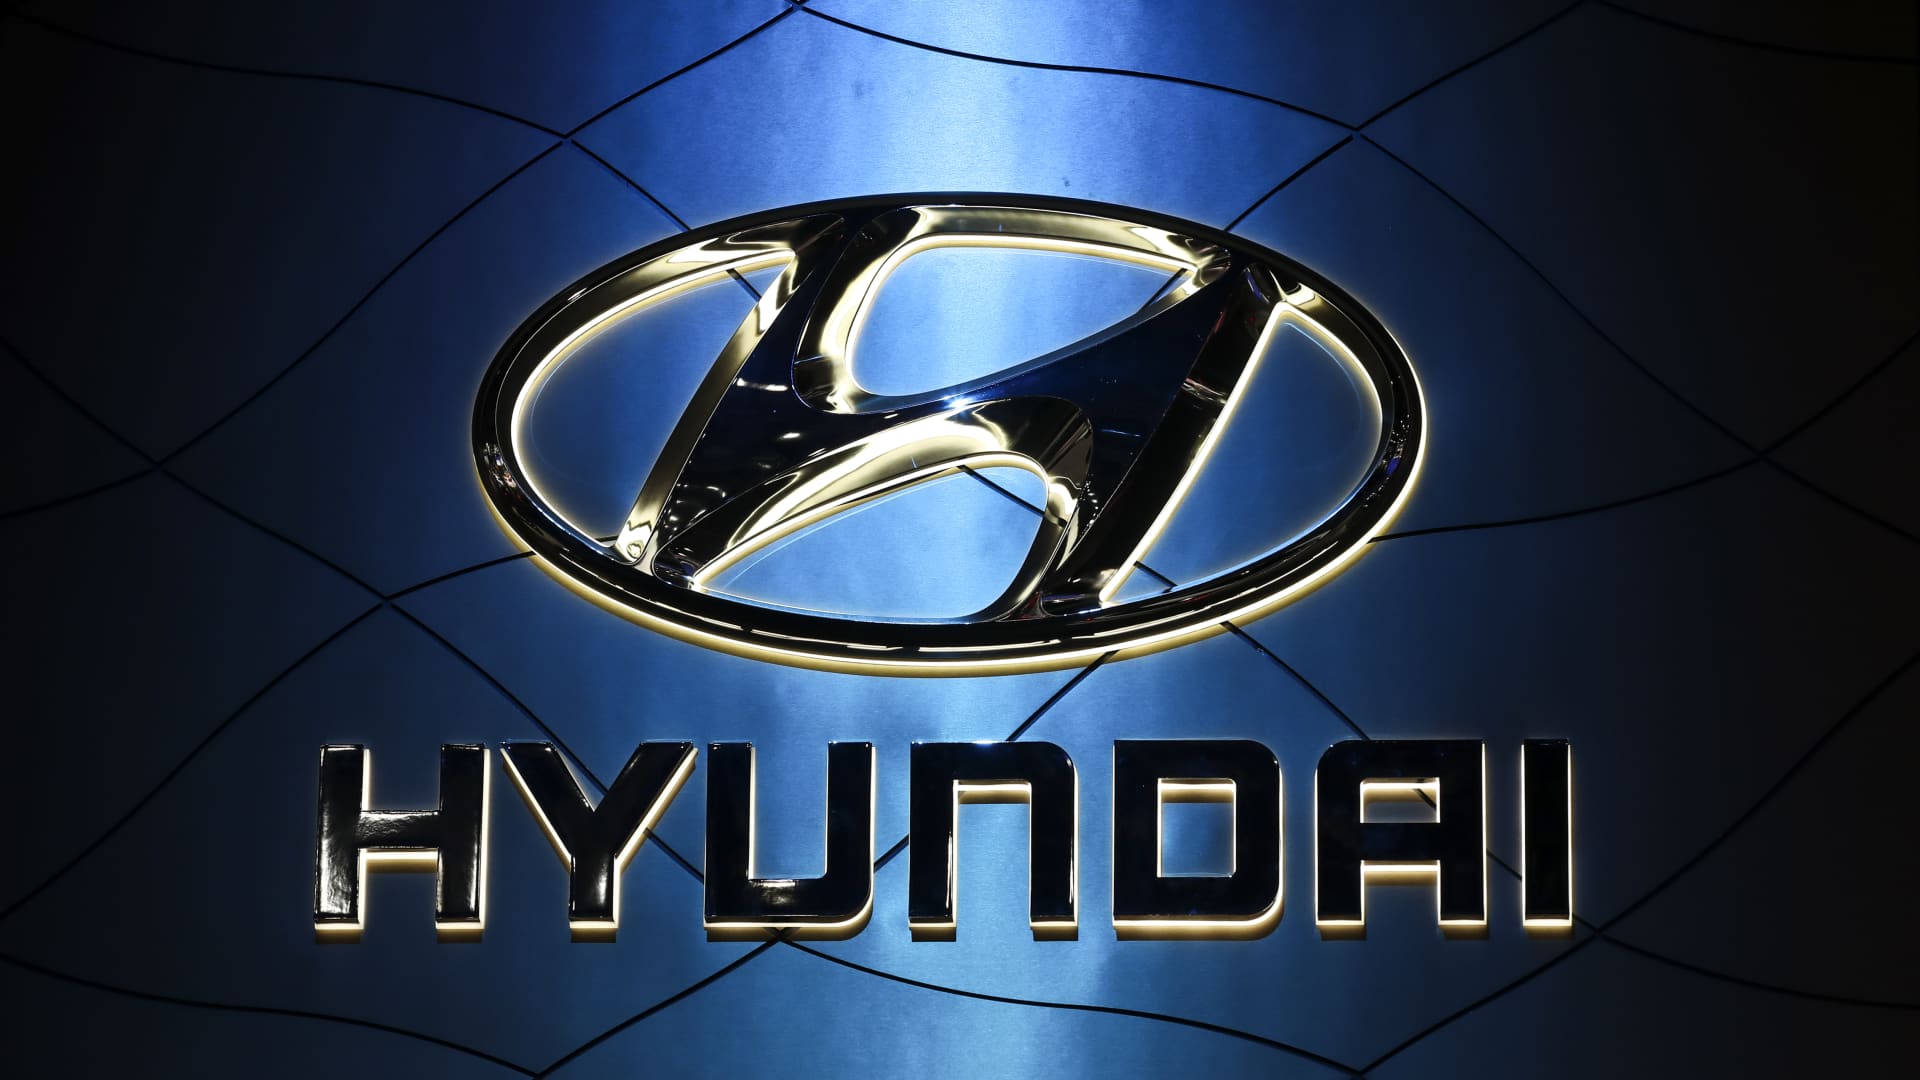 Hyundai plans  billion investment in U.S. on mobility technology